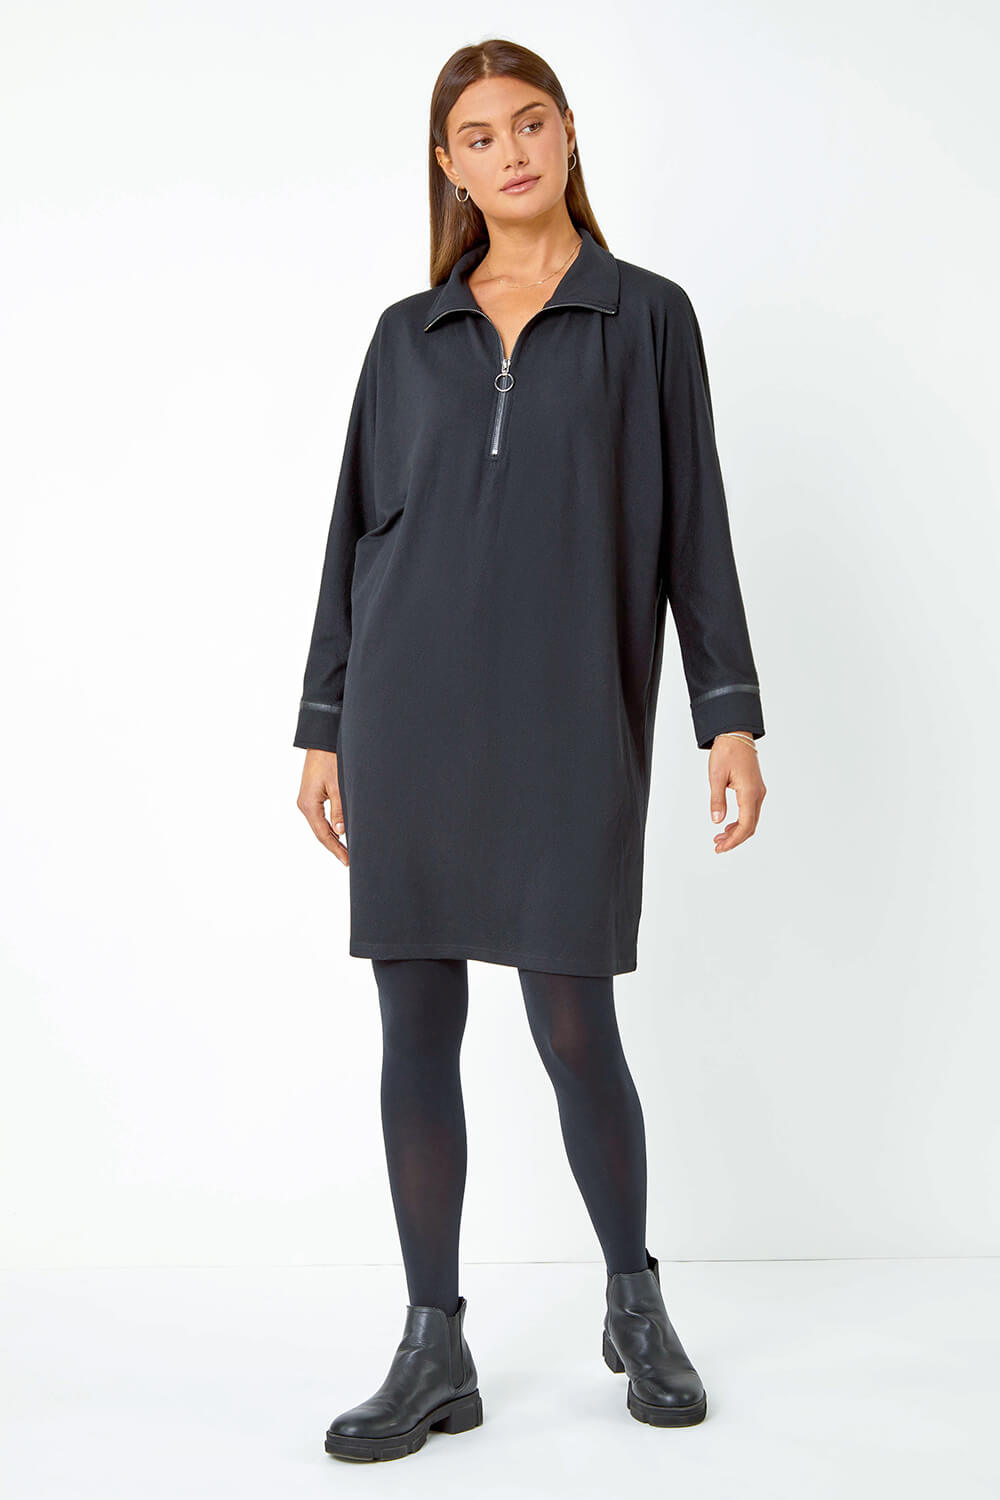 Black Zip Detail Cocoon Stretch Dress, Image 2 of 5